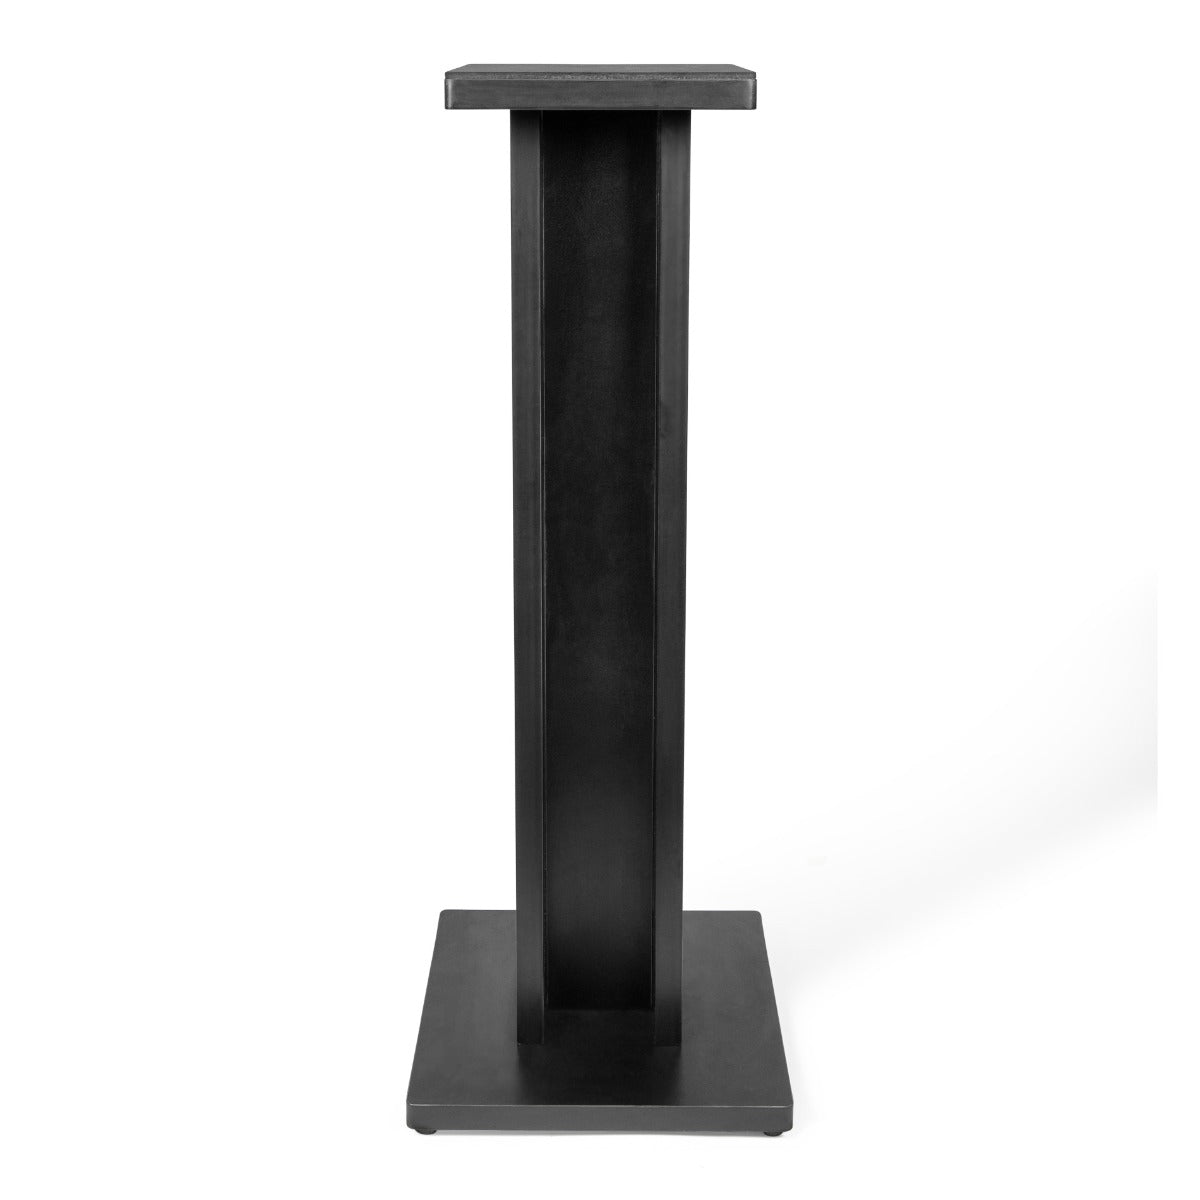 Front perspective of the Gator Frameworks Elite Series Studio Monitor Stand - Black